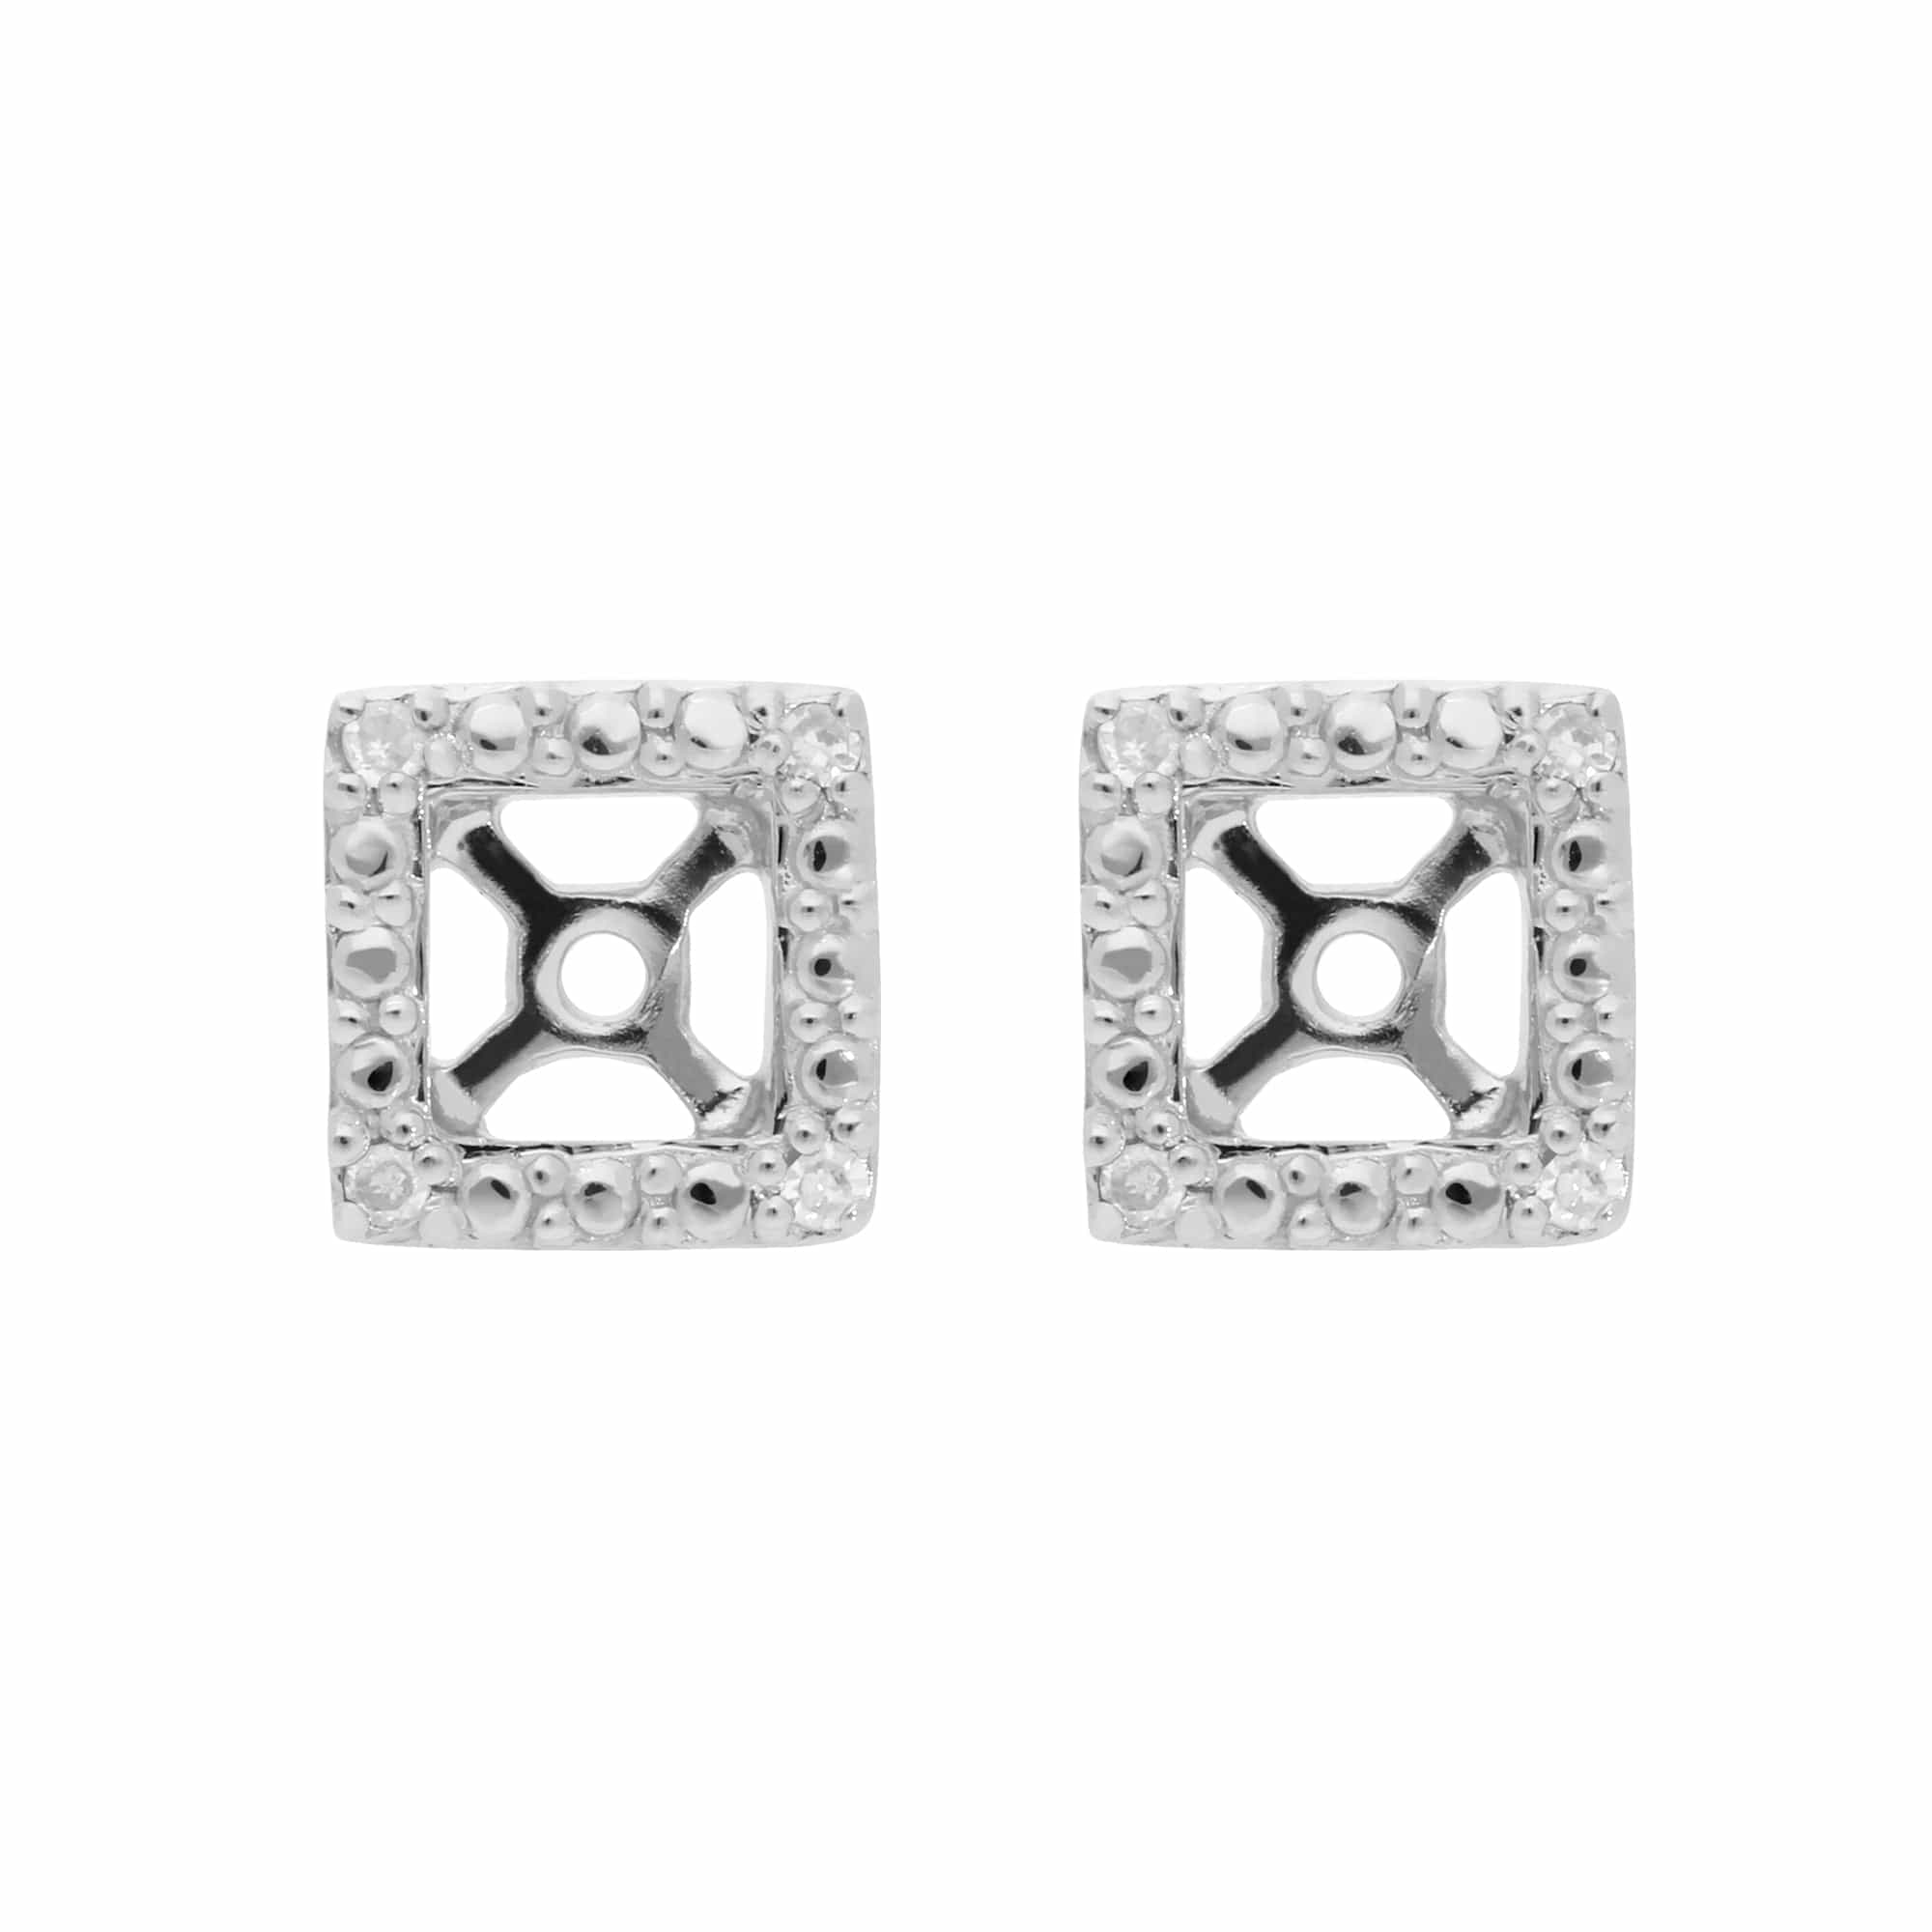 Classic Round Amethyst Stud Earrings with Detachable Diamond Square Ear Jacket in 9ct White Gold - Gemondo